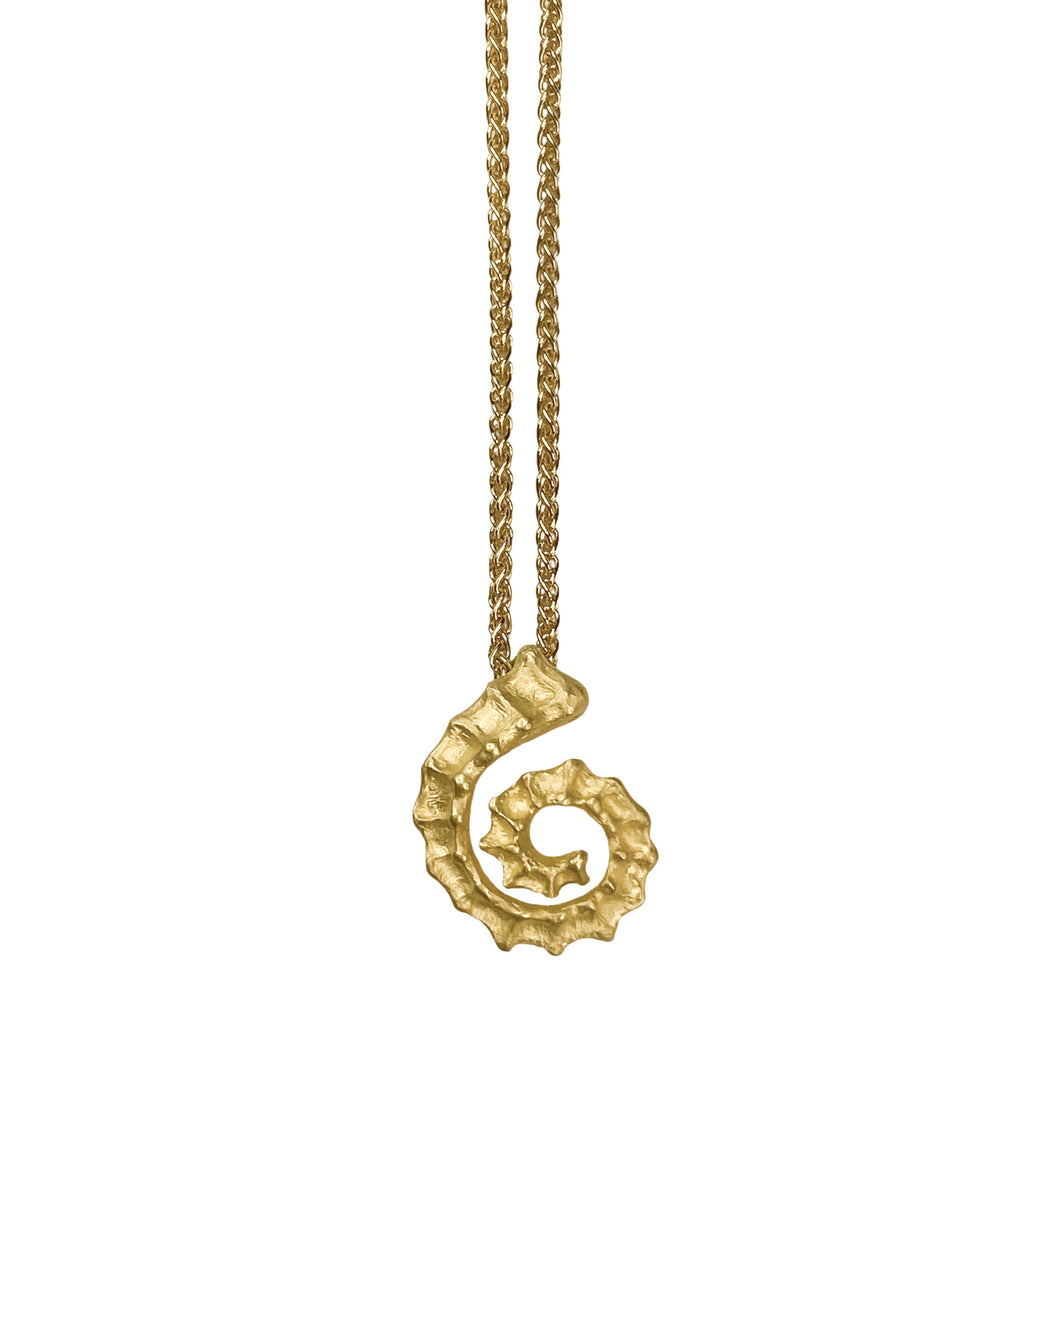 SEAHORSE NECKLACE — PALM CHAIN